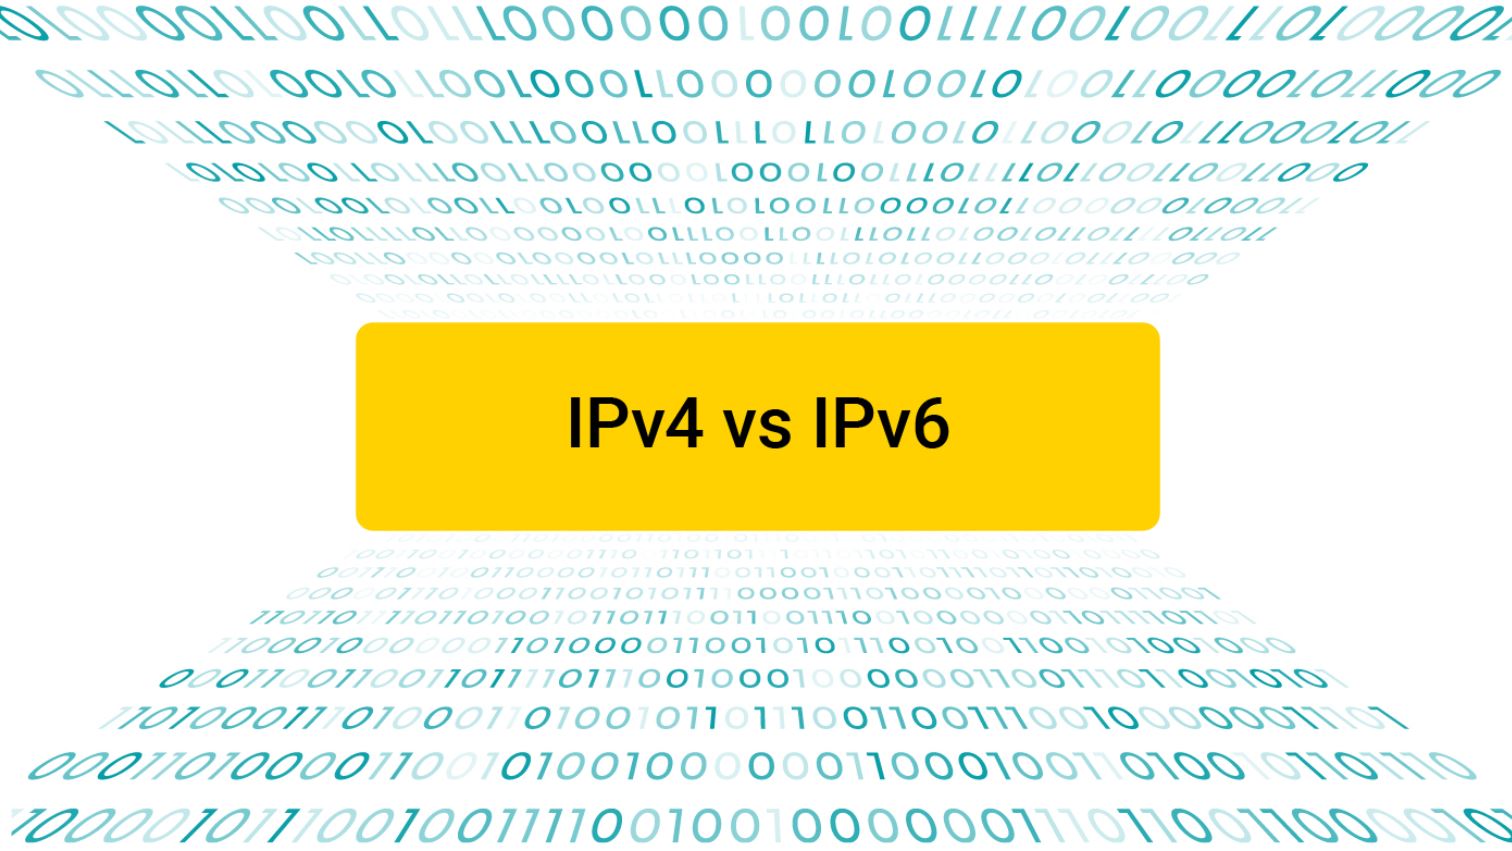 Why Is Ipv6 Preferred Over Ipv4 For IoT Implementation